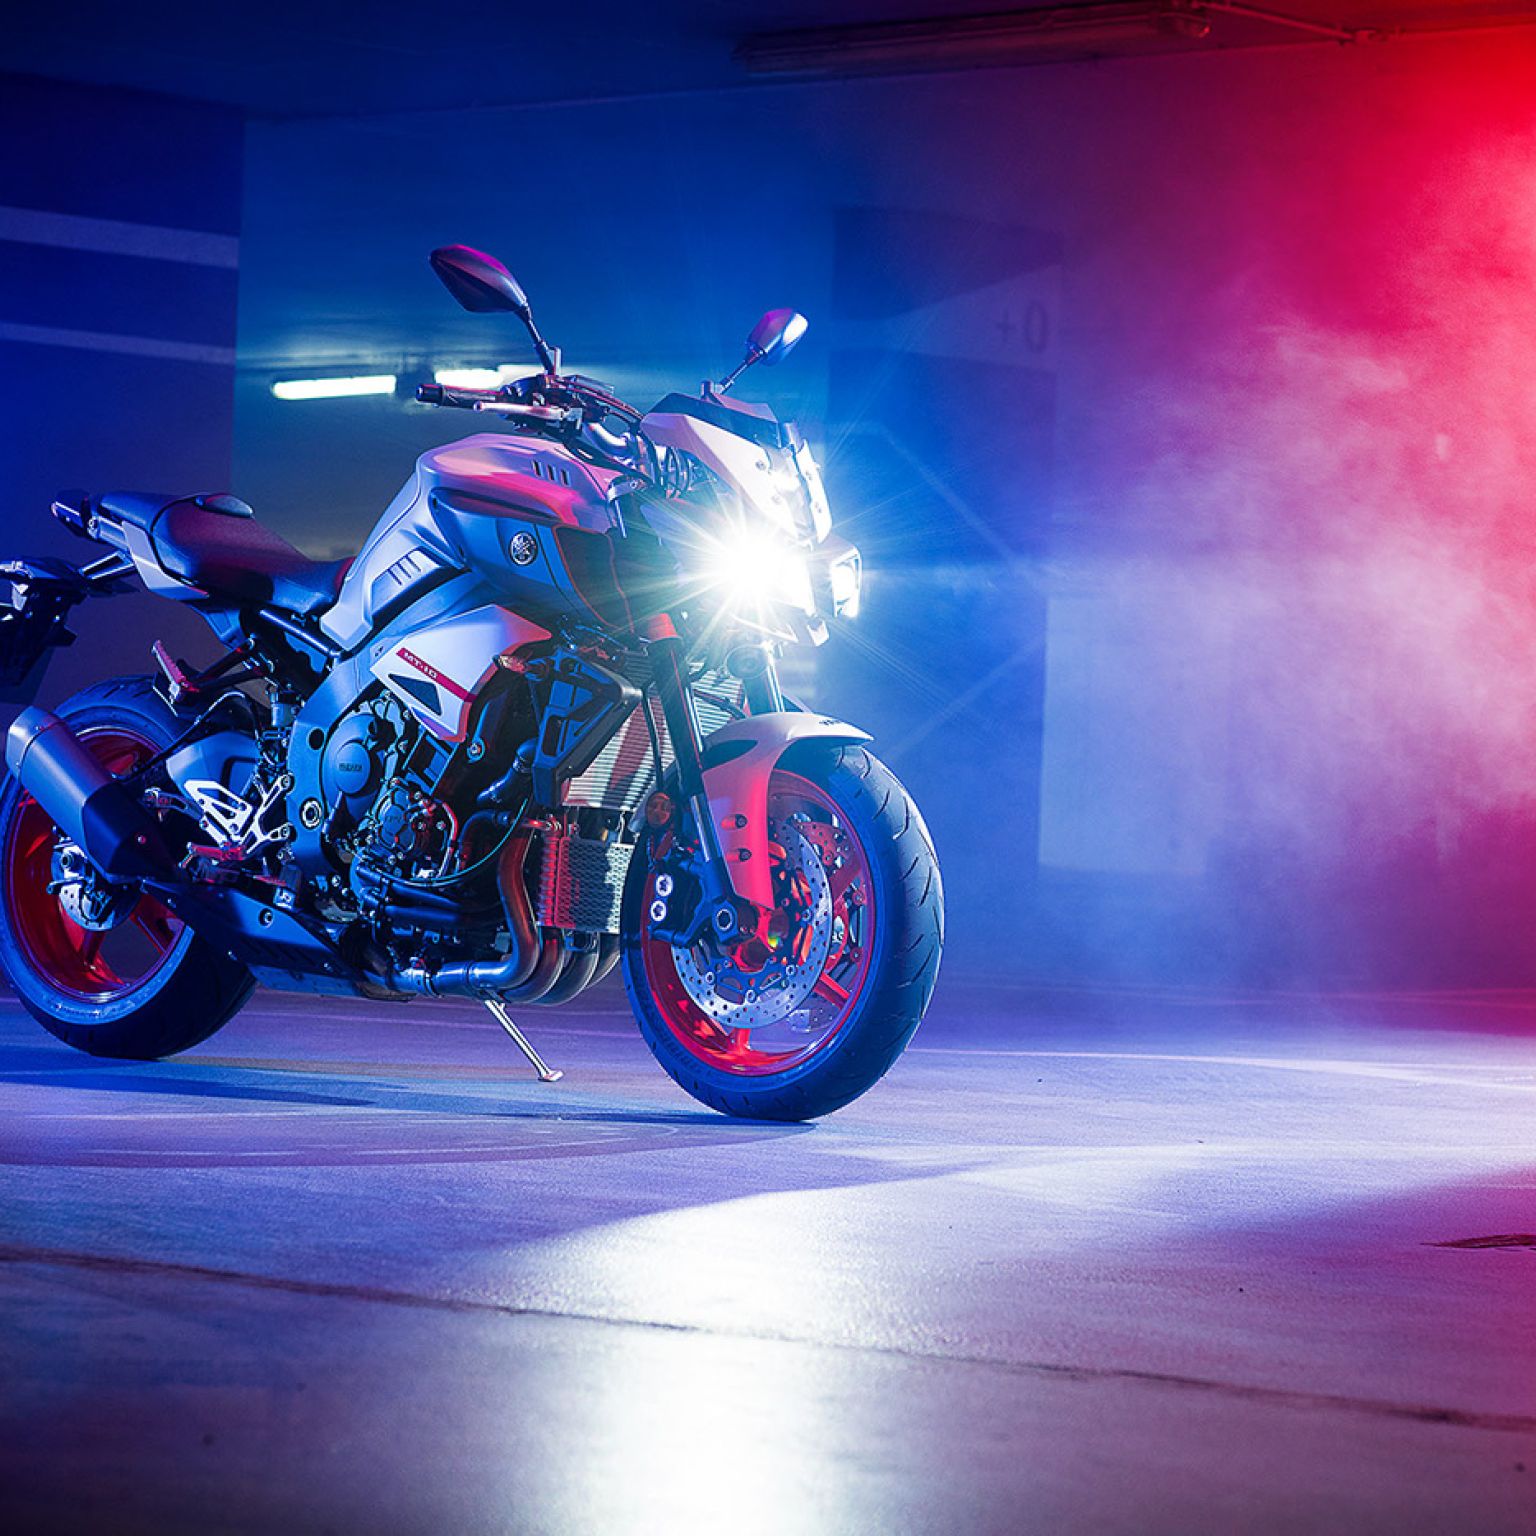 A Yamaha MT10 motorbike in a studio lit up with red and blue.